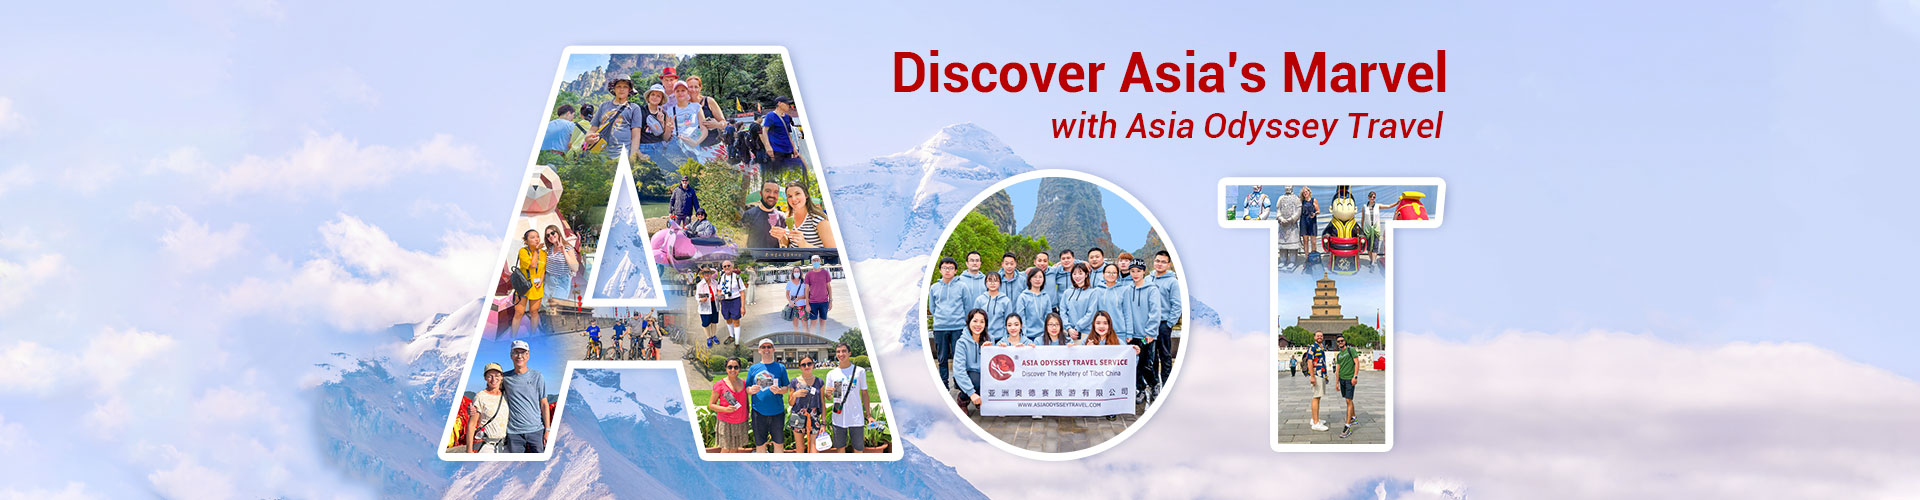 How to Book A Tour with Asia Odyssey Travel